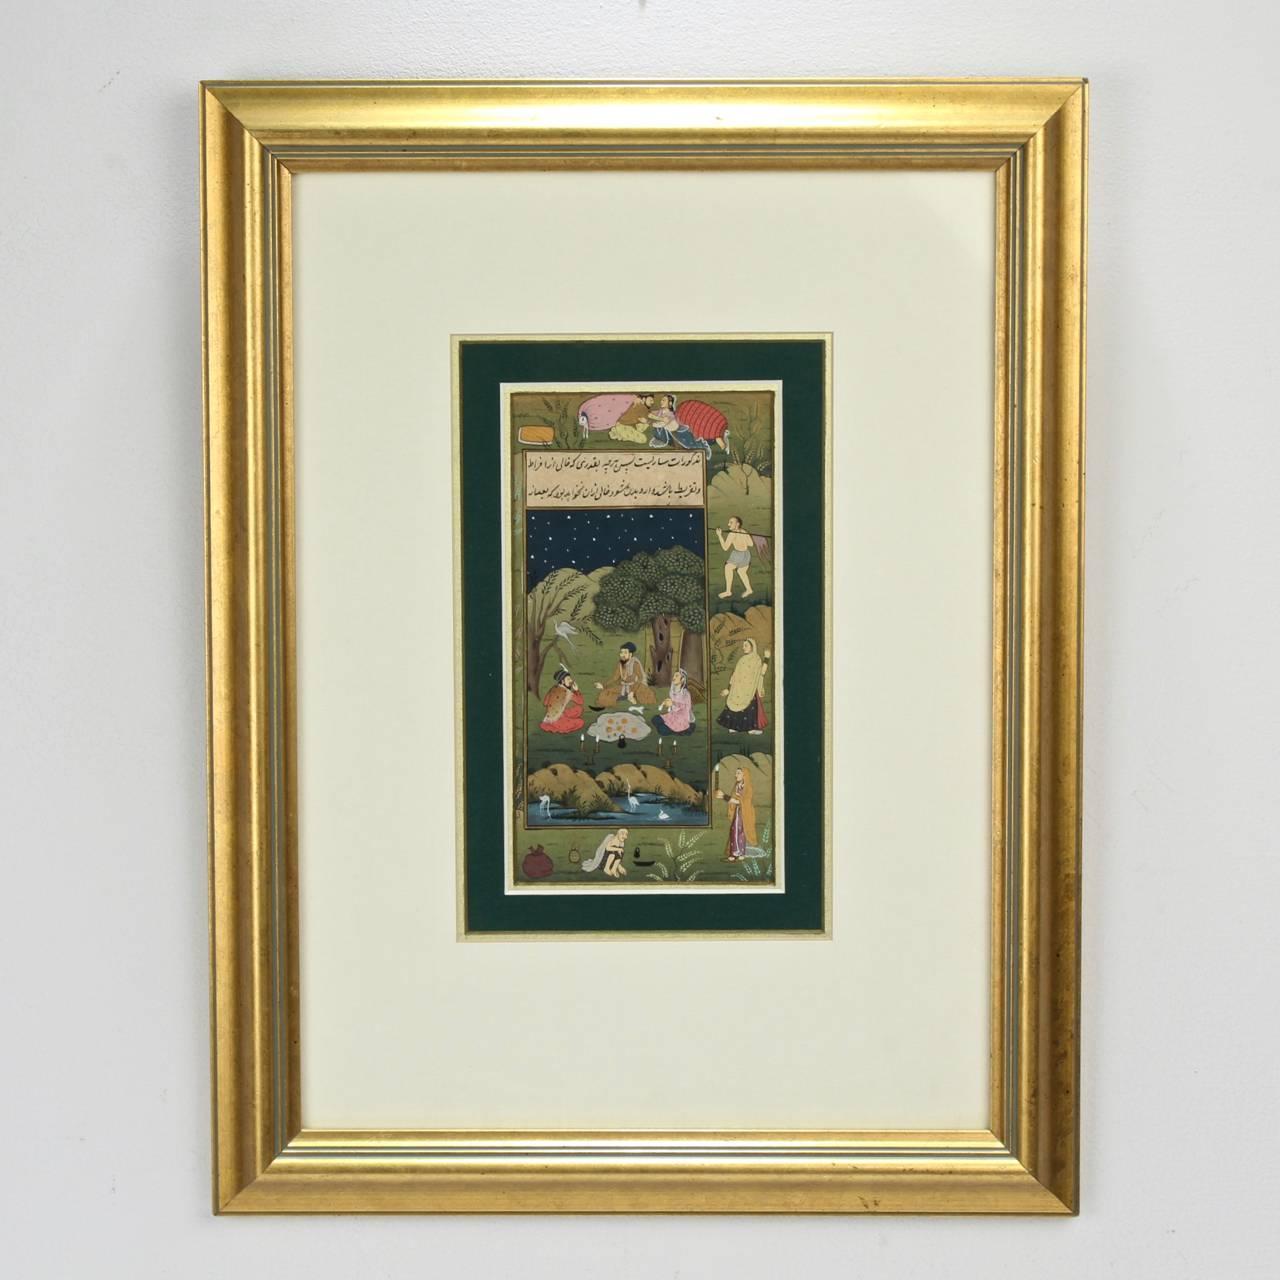 A fine antique Indian or Indo-Persia Moghul Islamic Illustrated manuscript folio.

Depicting an outdoor picnic scene, a lover's vignette, and other small scenes.

Polychrome hand-illustrated decoration on paper. 

Mounted under matte and glass